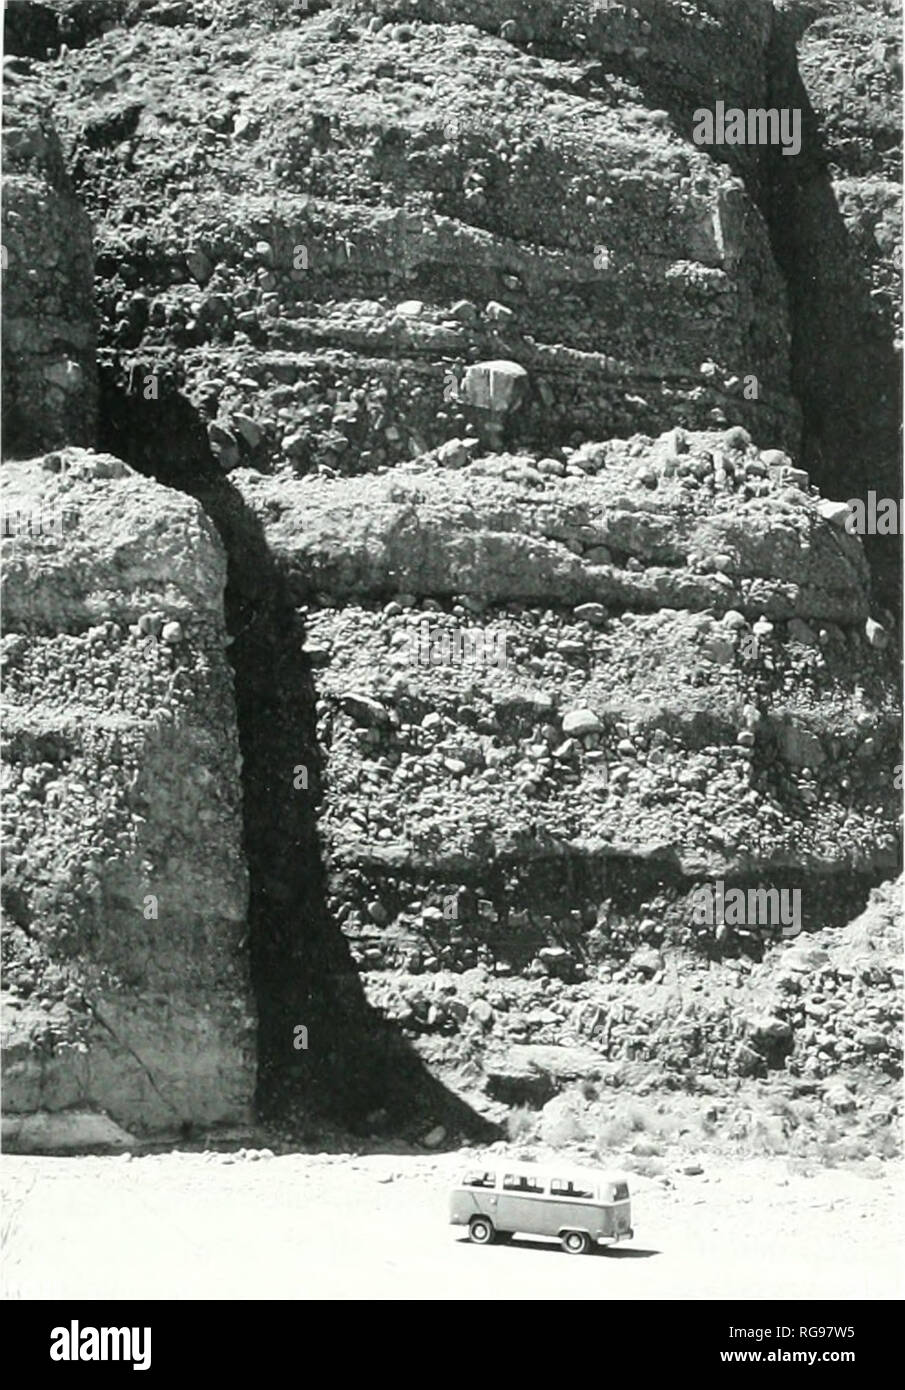 . Bulletins of American paleontology. Baja California SrRAriGRAPH: Carreno and Smith 65. Text-figure 40.—Split Mountain Gortie. Miocene reddish-brown alluvial tan deposits exposed in Fish Creek Wash. View west at rocks that Woodward ( 1974) referred to the Anza Formation (Bor- rego Mountain SE 7';-miniitc quadrangle SE '4, NW '4 Sec. 2.*^. T 1.1 S. R S E). The alUiNial sediments underlie the &quot;lower houlder beds.&quot; which are now regarded as a stur/strom in the Split Mountain Formation (D. R. Kerr, written communication, 2004). Photo, J. C. hmle. Jr. I9.S4. Gypsum, as seen on the geolo Stock Photo